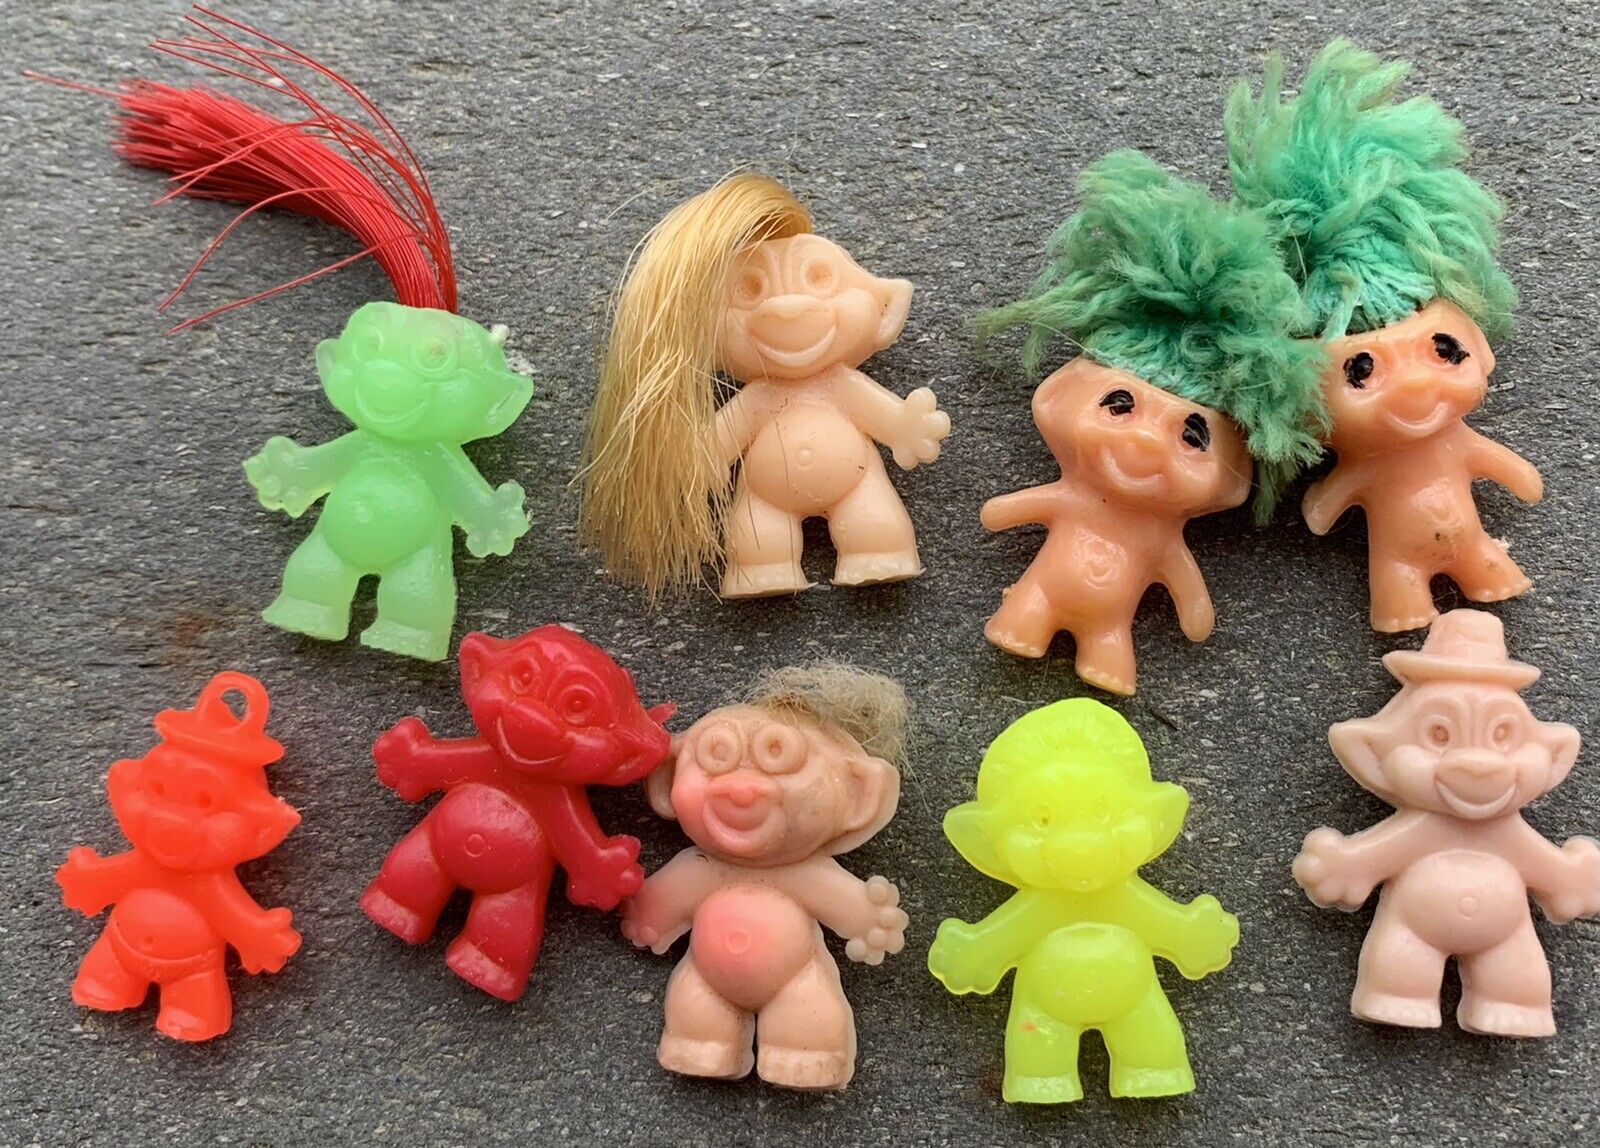 9 Vintage Troll Gumball Machine Toys Charms Mini Figures Miniature Green Red